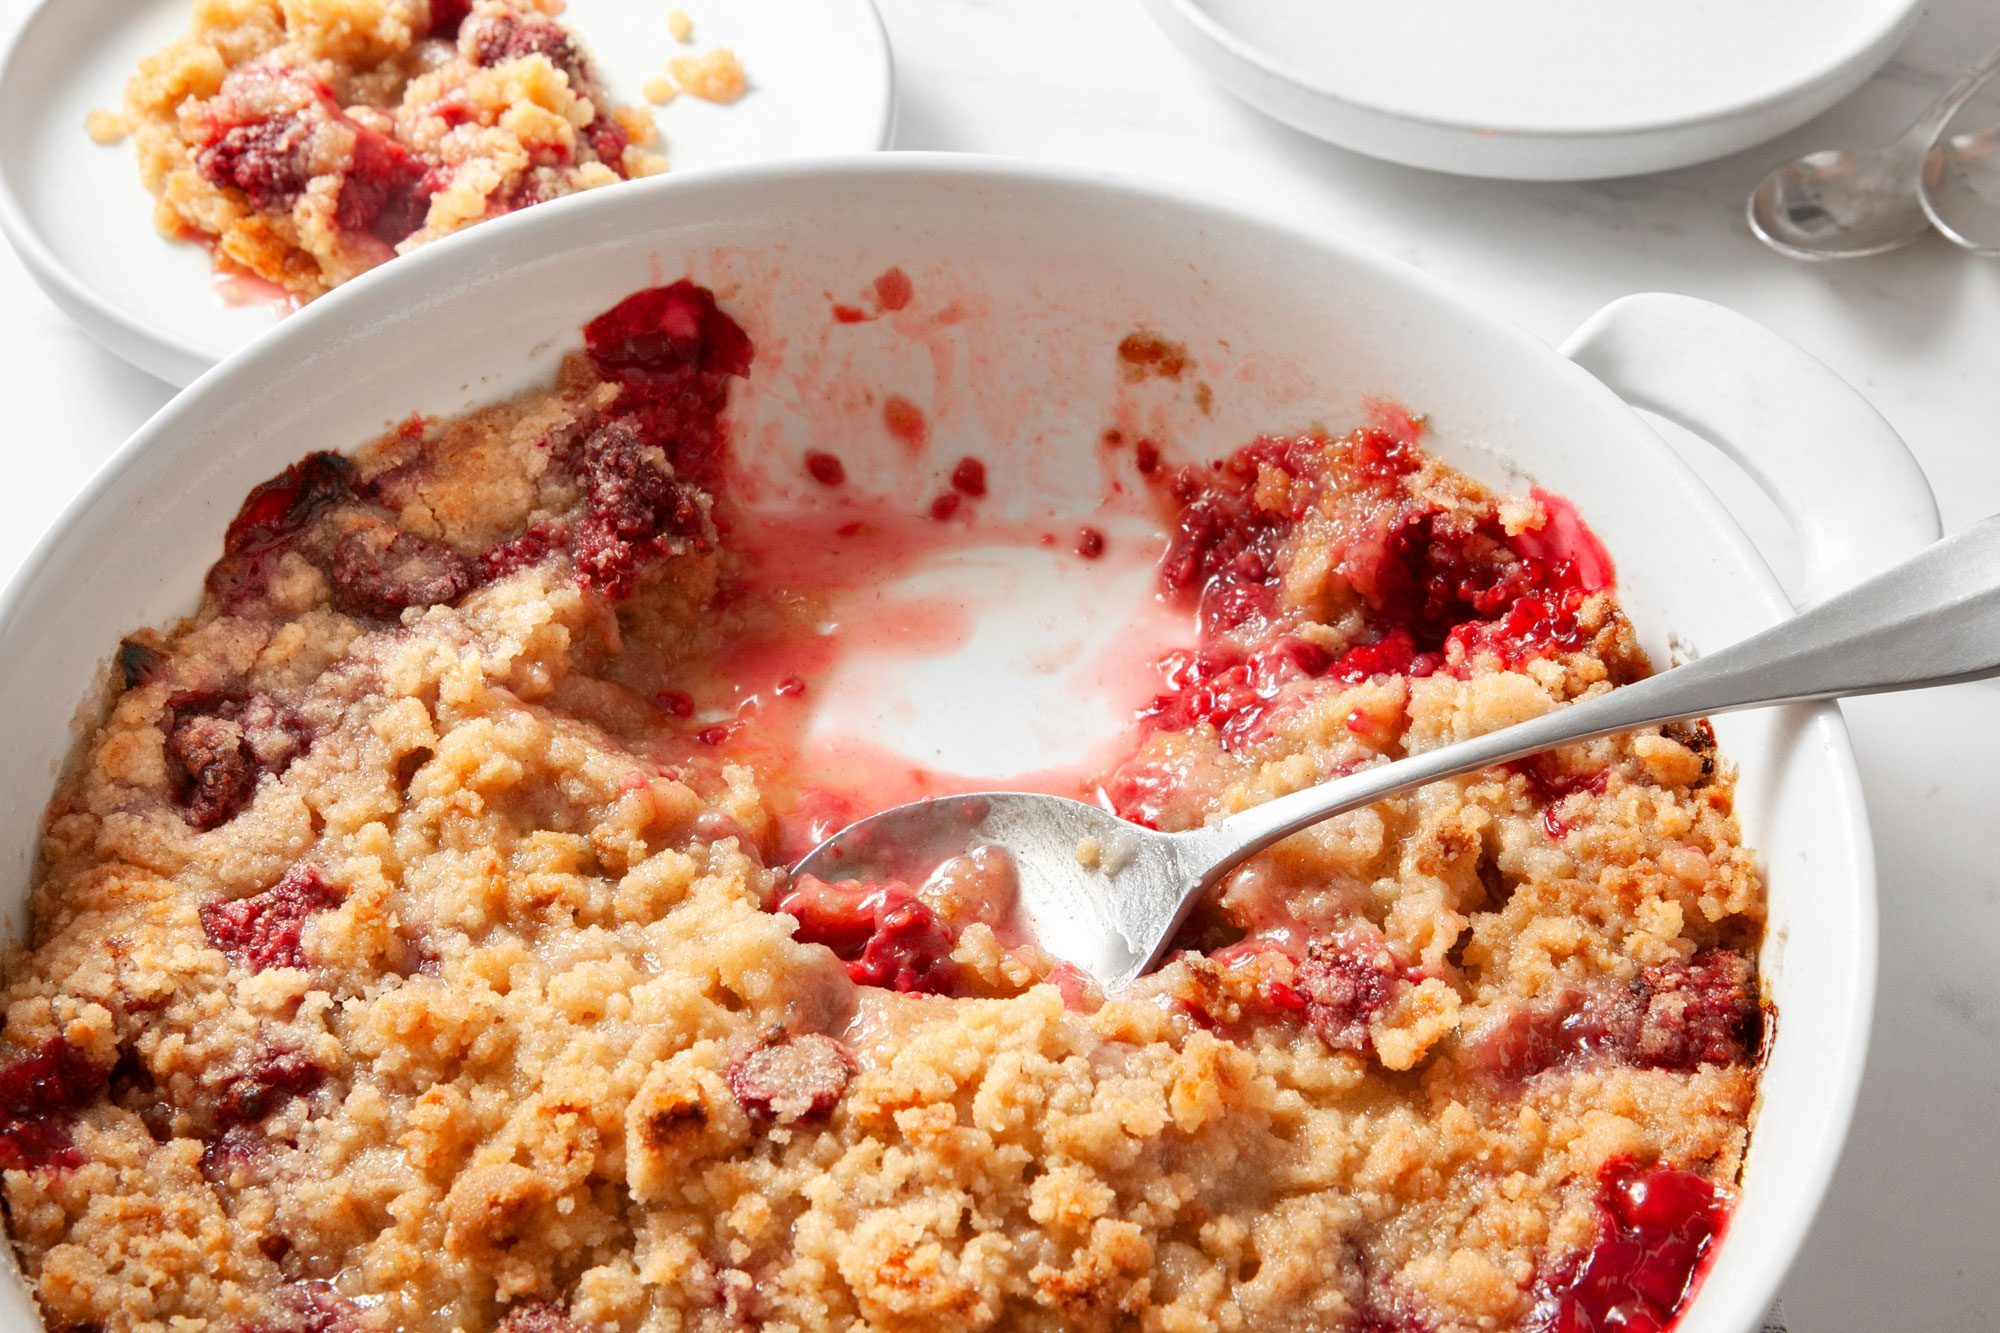 Easy Raspberry Crumble served in a large serving dish over kitchen towel raspberry crumble also served in small plate and one large spoon